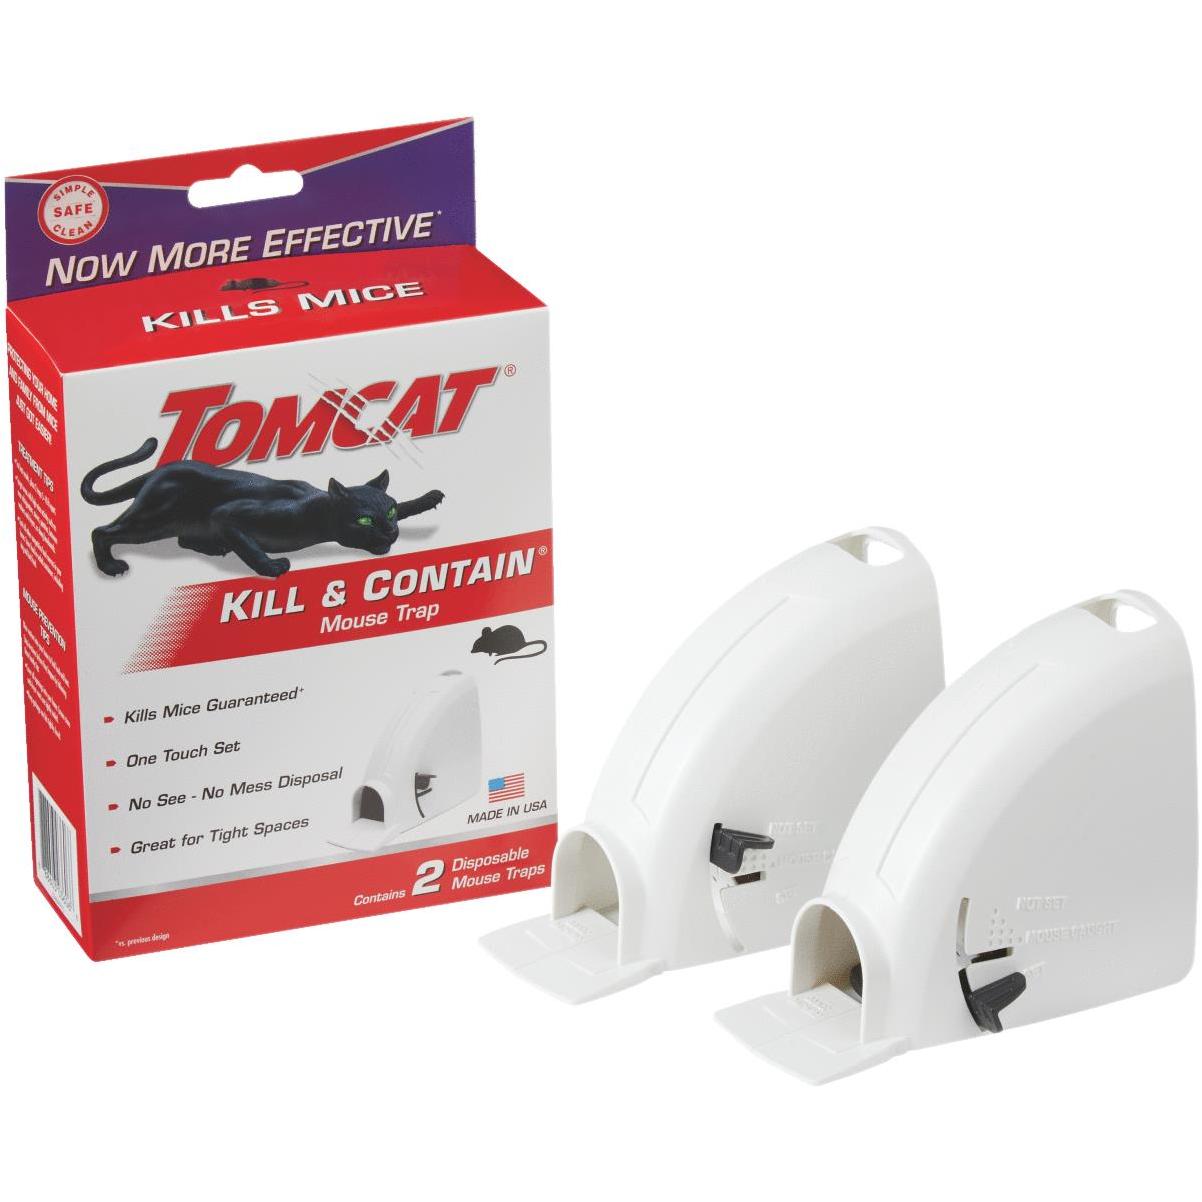 TOMCAT Spin trap Mouse Traps